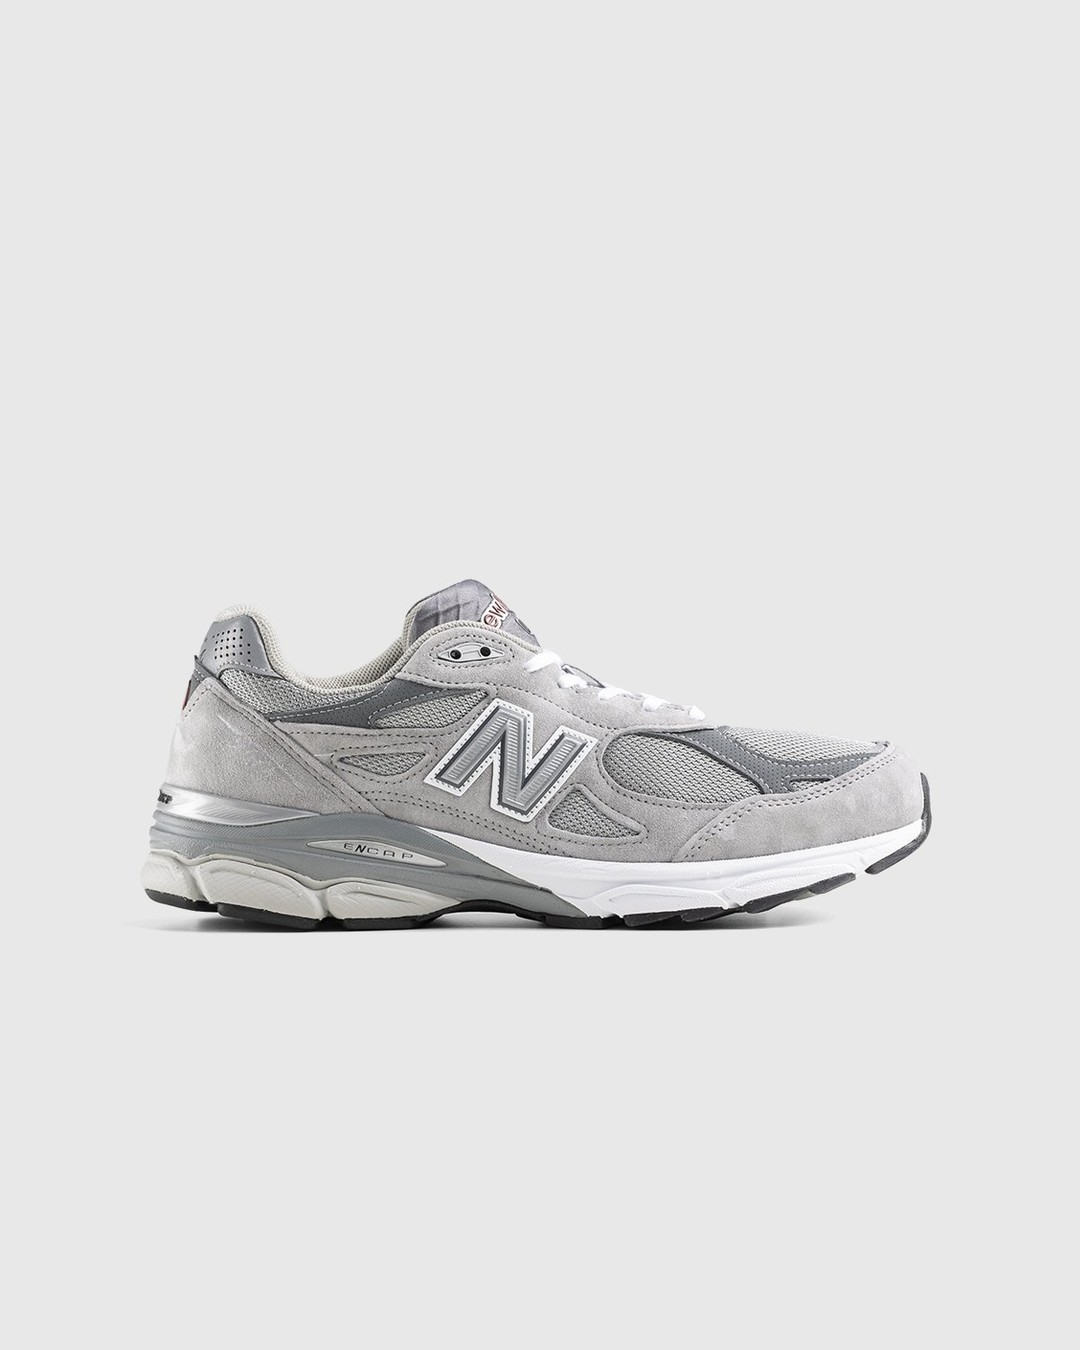 New Balance – M990GY3 Grey - Low Top Sneakers - Grey - Image 1